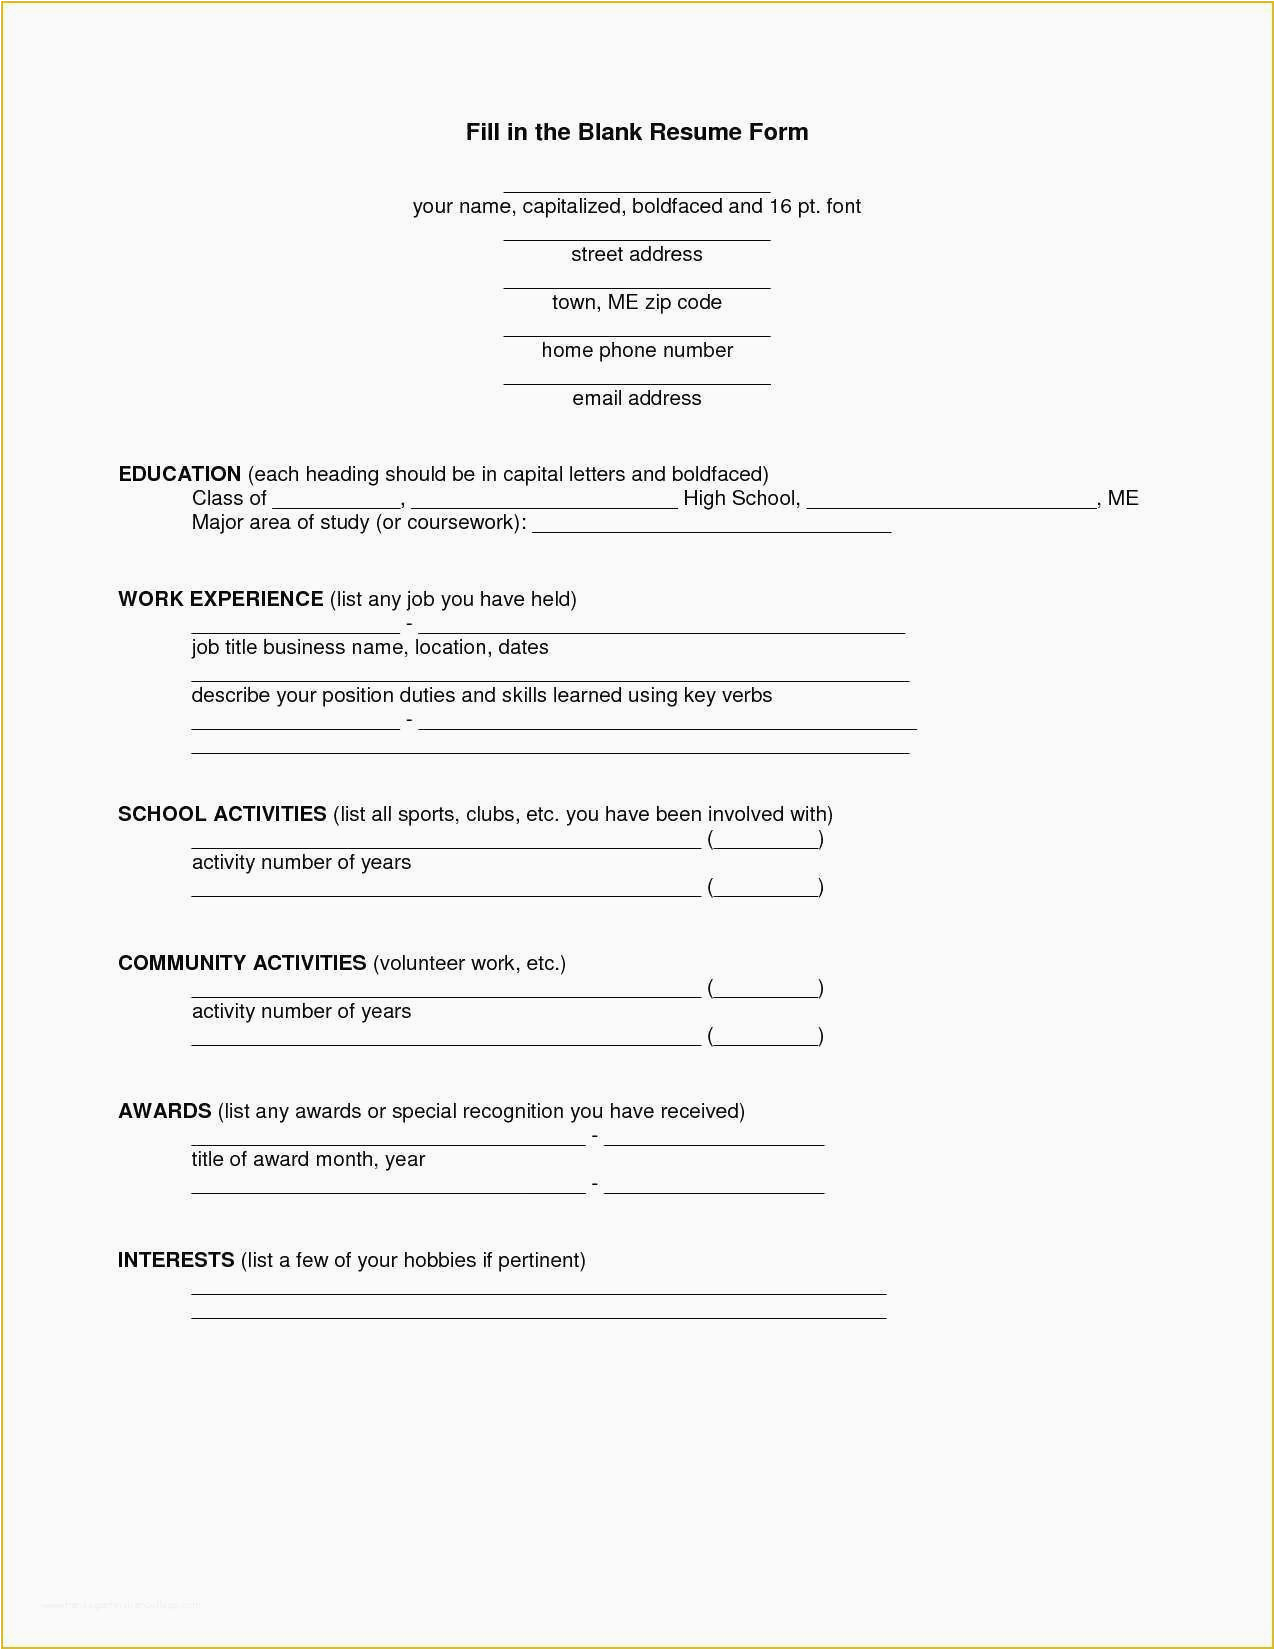 Blank Resume Template for College Students Free Resume Outline Template Free Resume Templates Cv